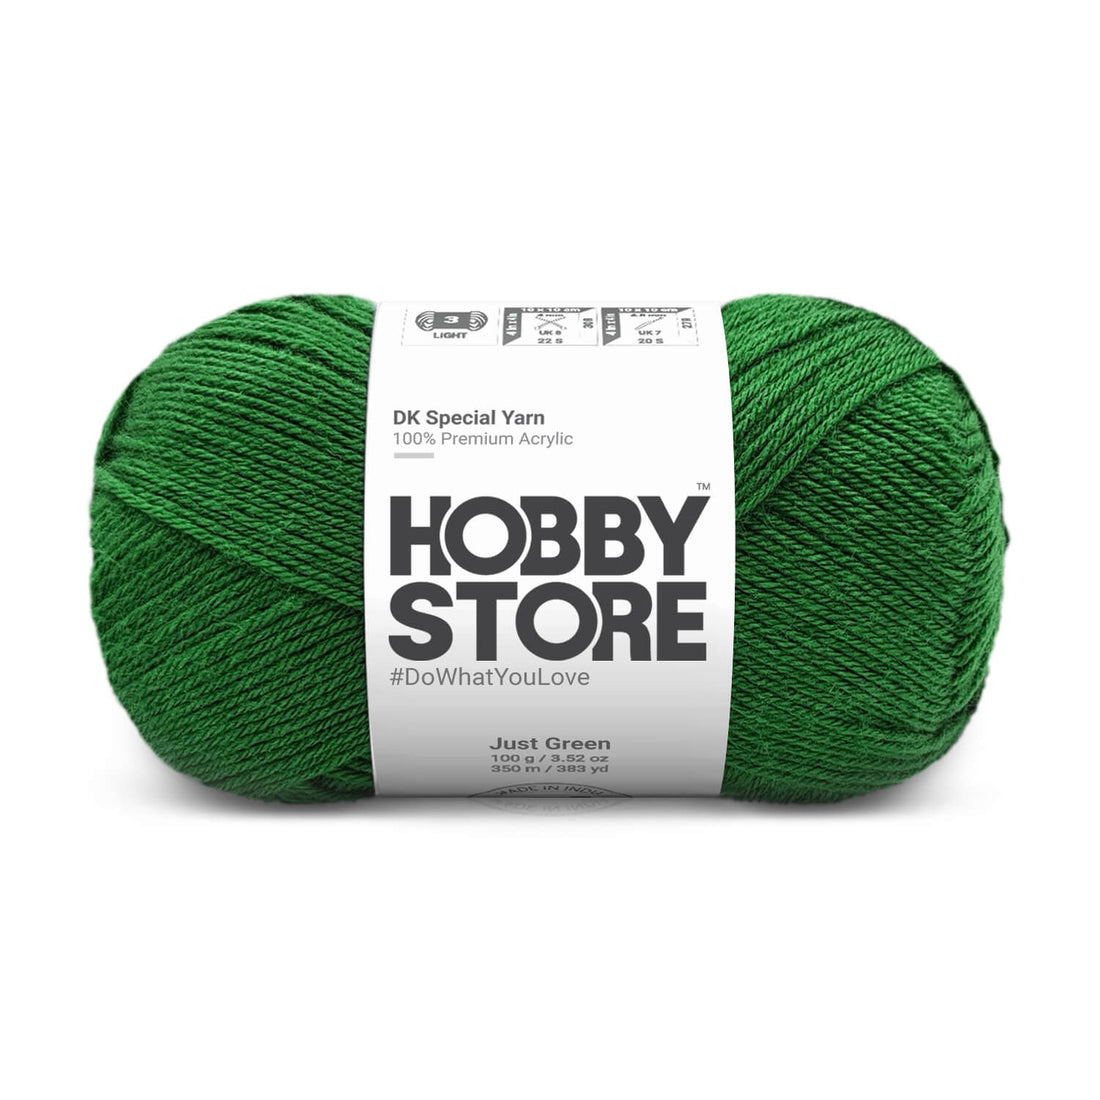 Hobby Store DK Special Yarn - Just Green 5030